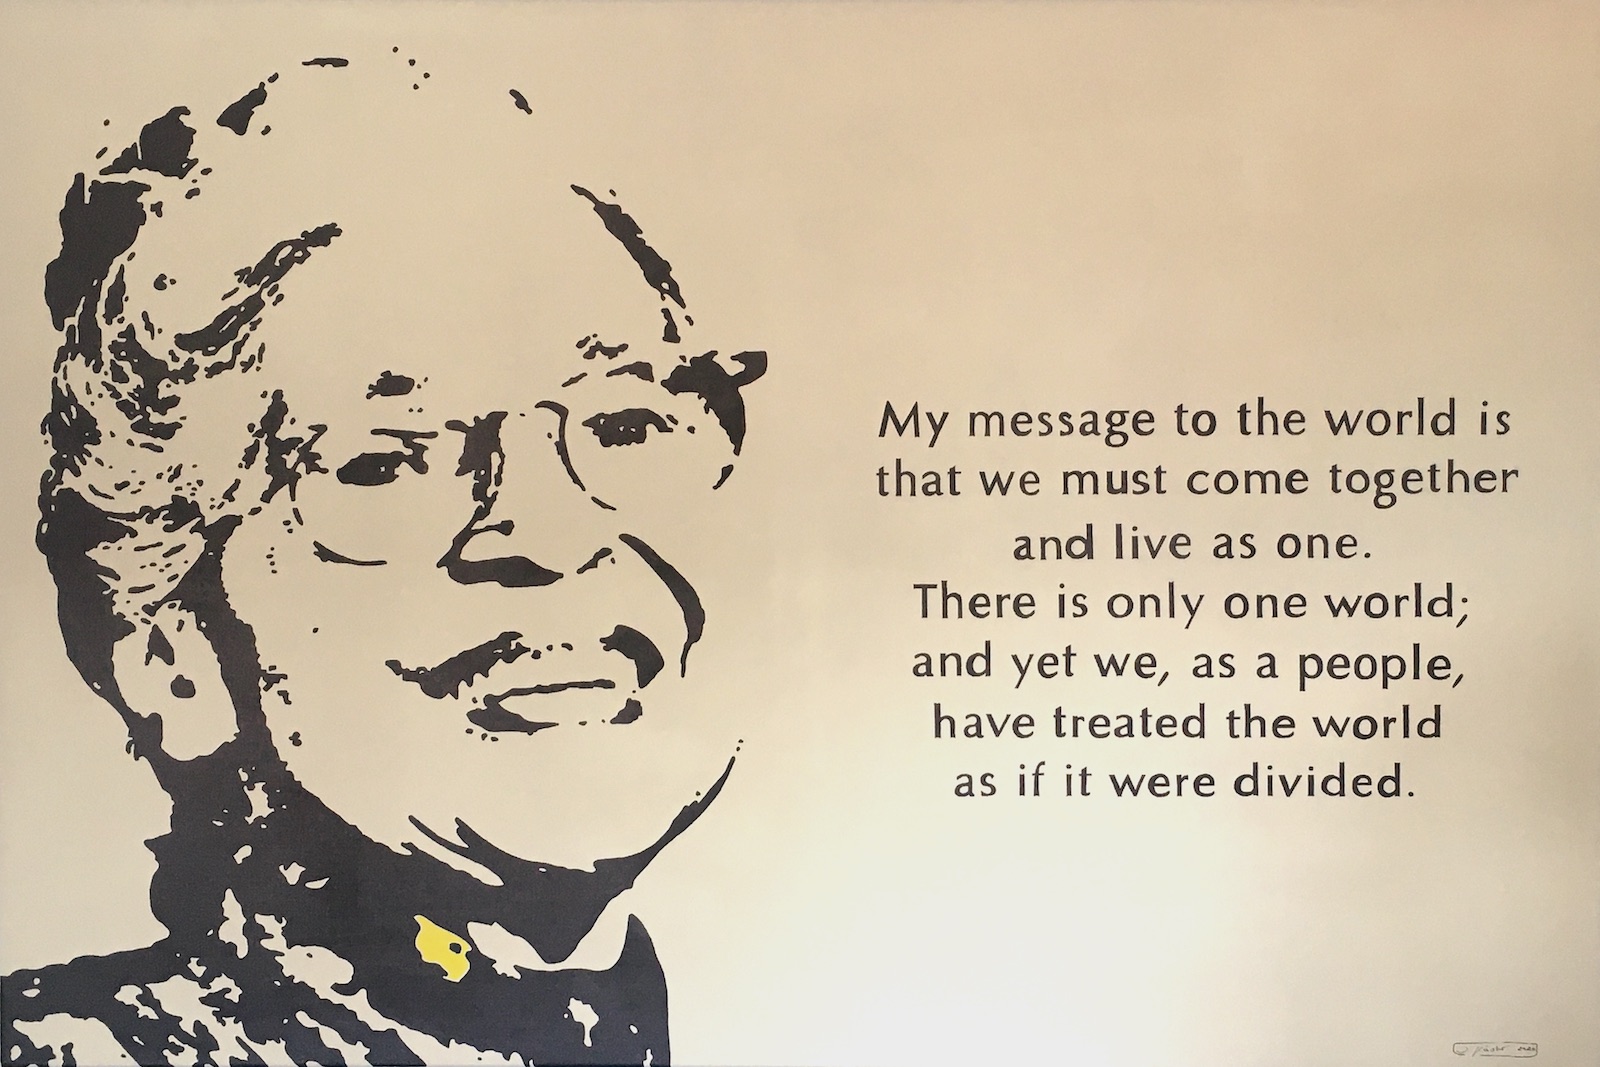 Hommage to Rosa Parks - We Must Come Together and Live As One